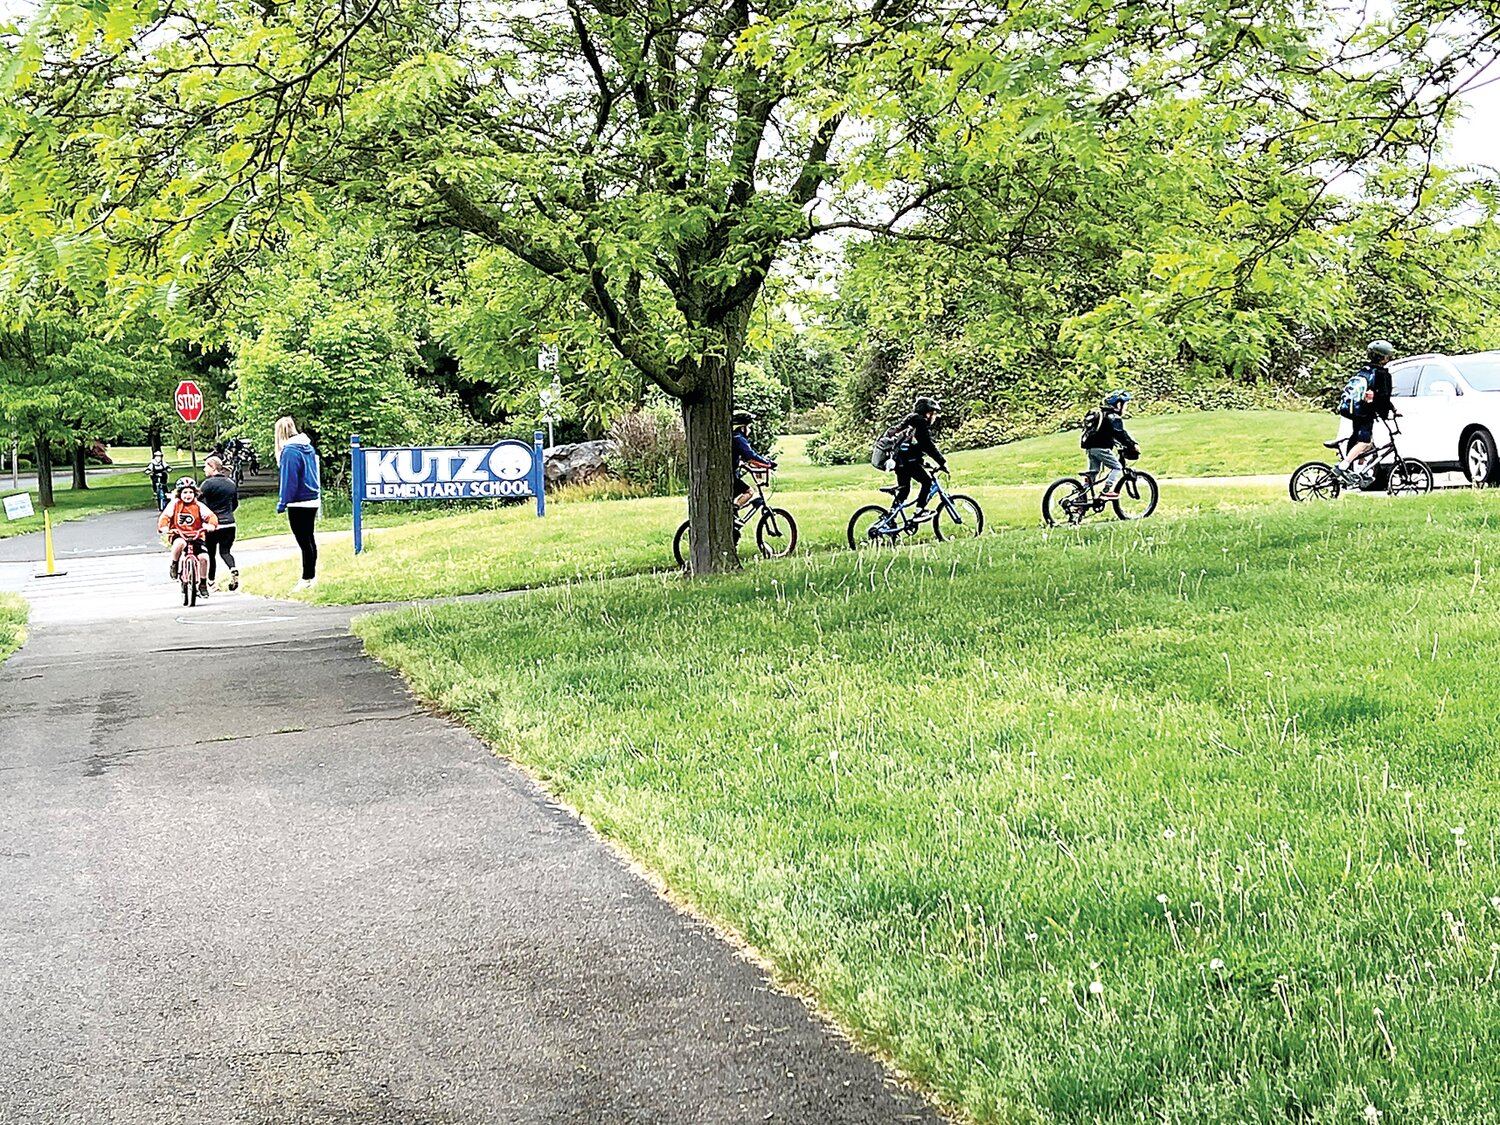 Students participate in a bike ride that started at the Doylestown Township municipal building and traveled through Central Park and ended at the elementary school.